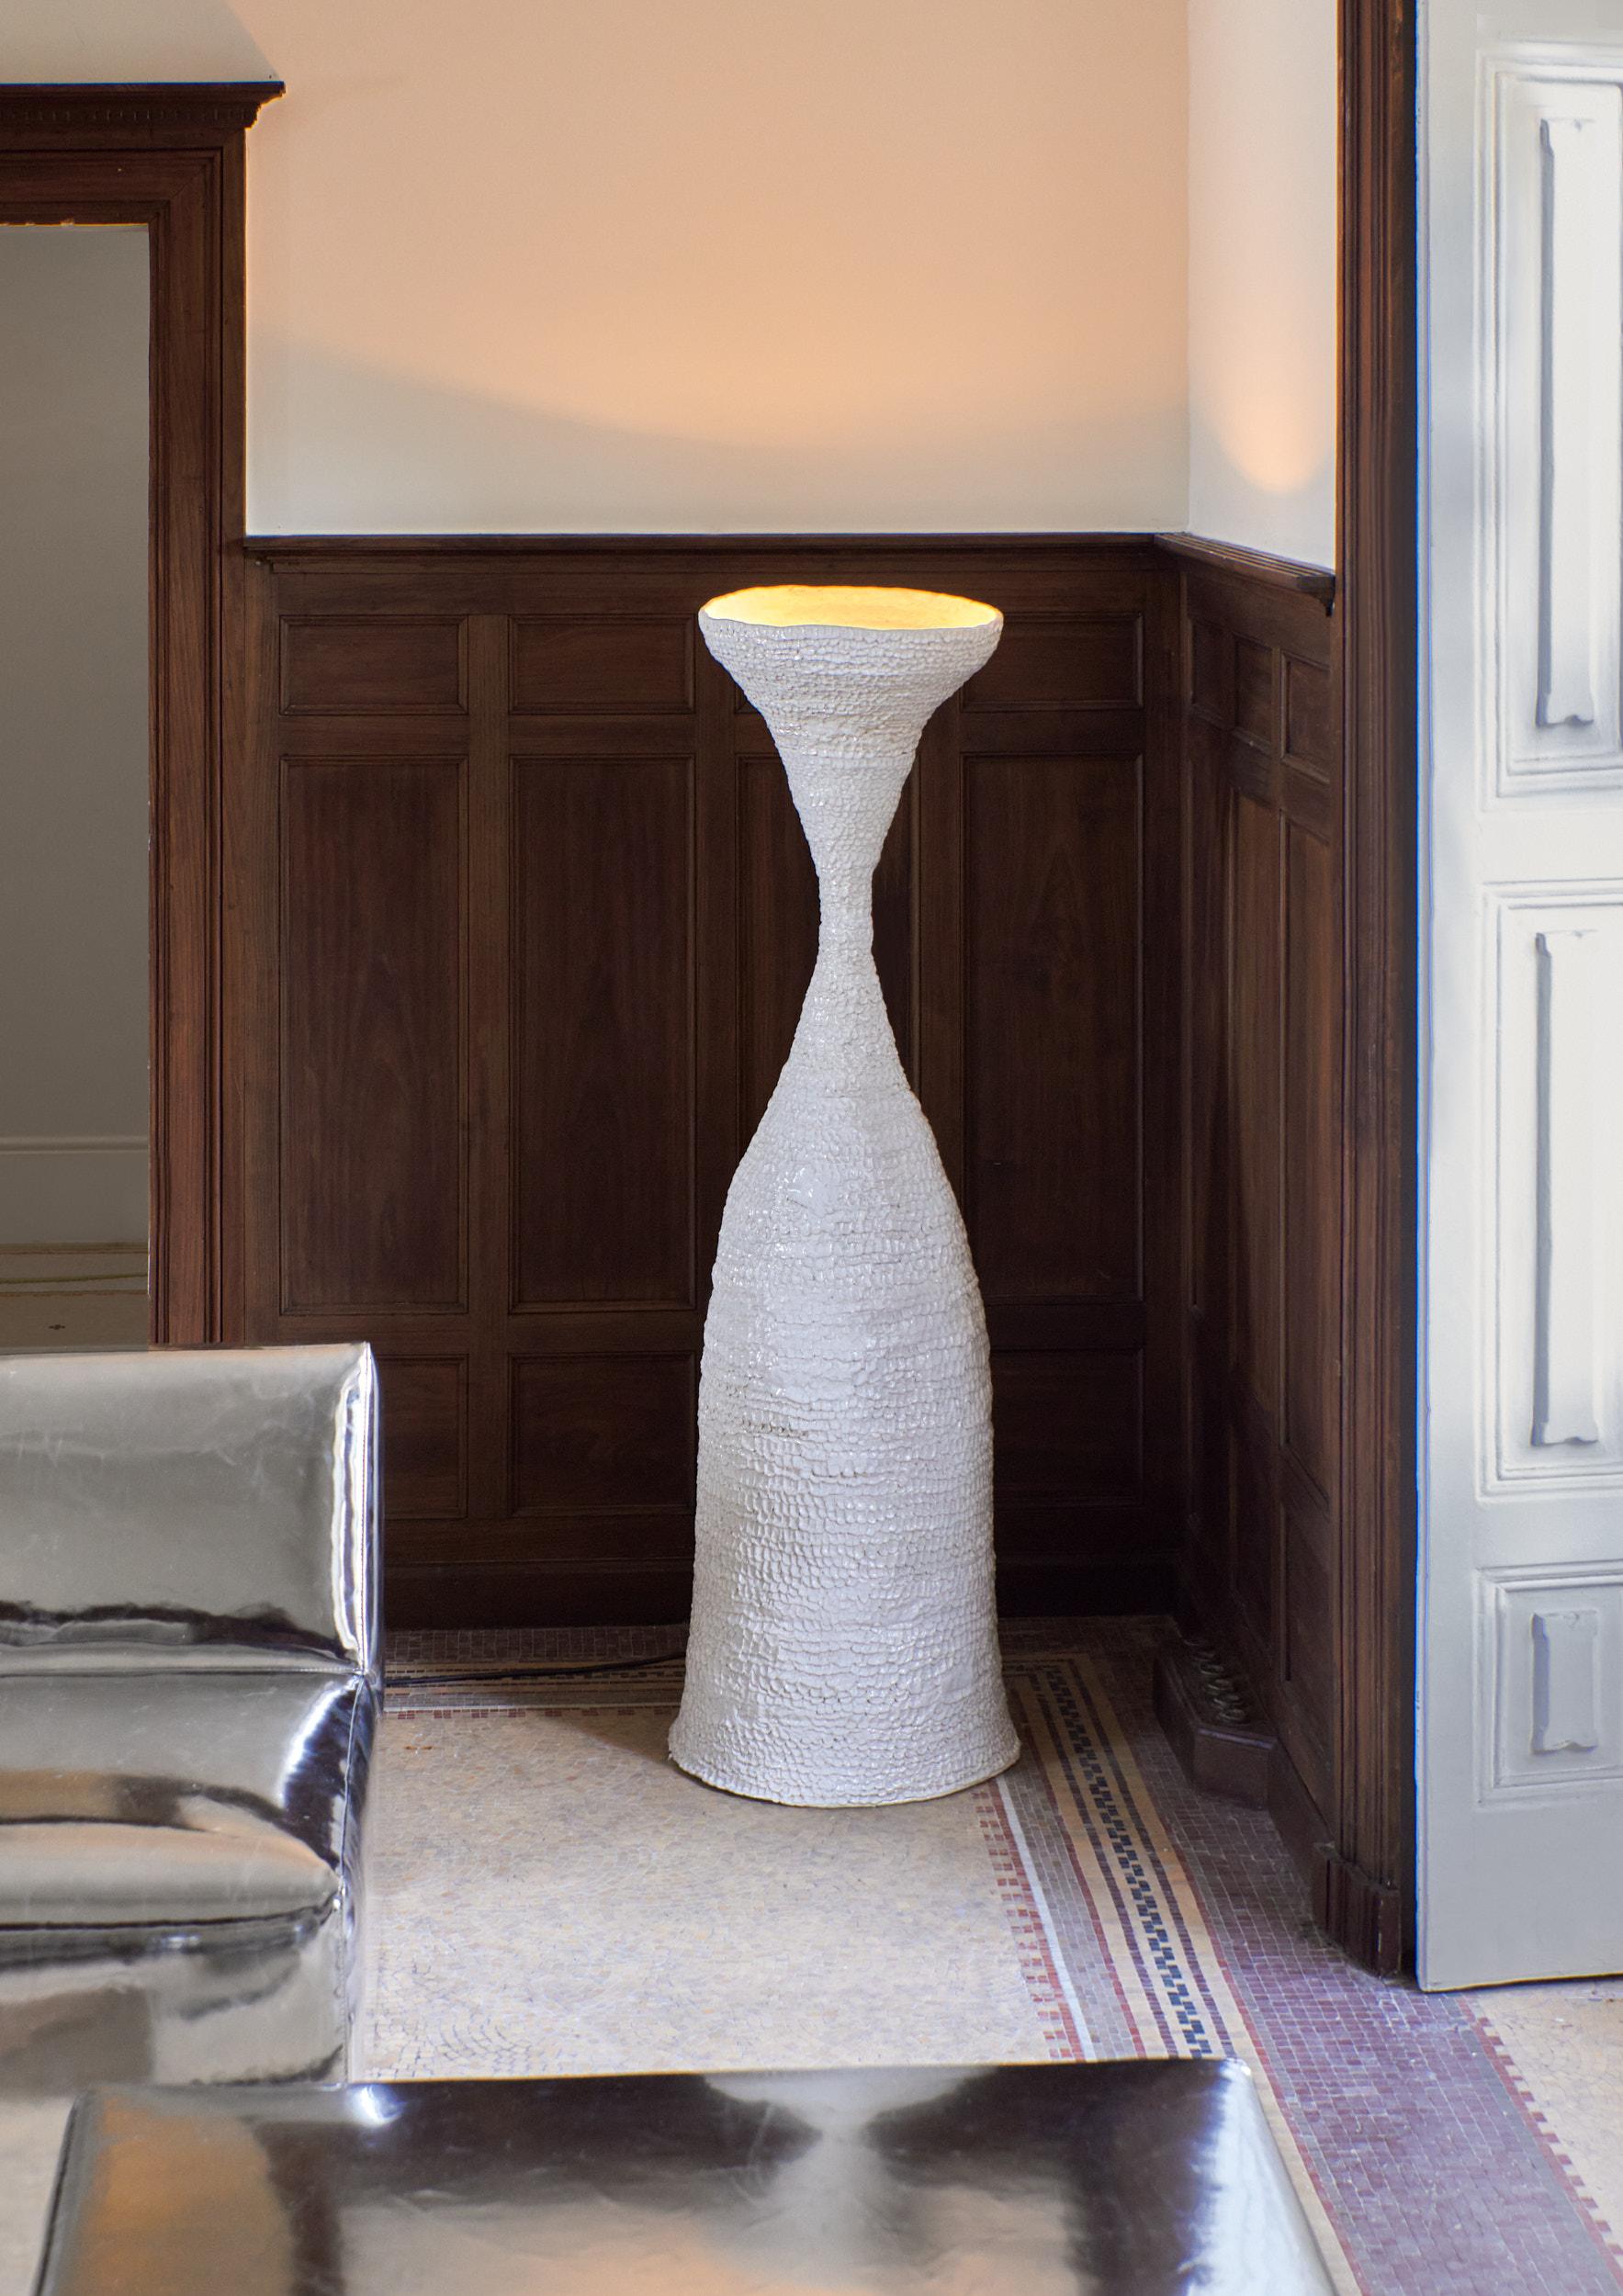 Casa Standing Light in white
Designed by Project 213A in 2023

Large artisanal ceramic standing light with textured finish, made in Project 213A's own ceramic workshop.
Each piece is unique due to its handmade nature, shapes and shades vary